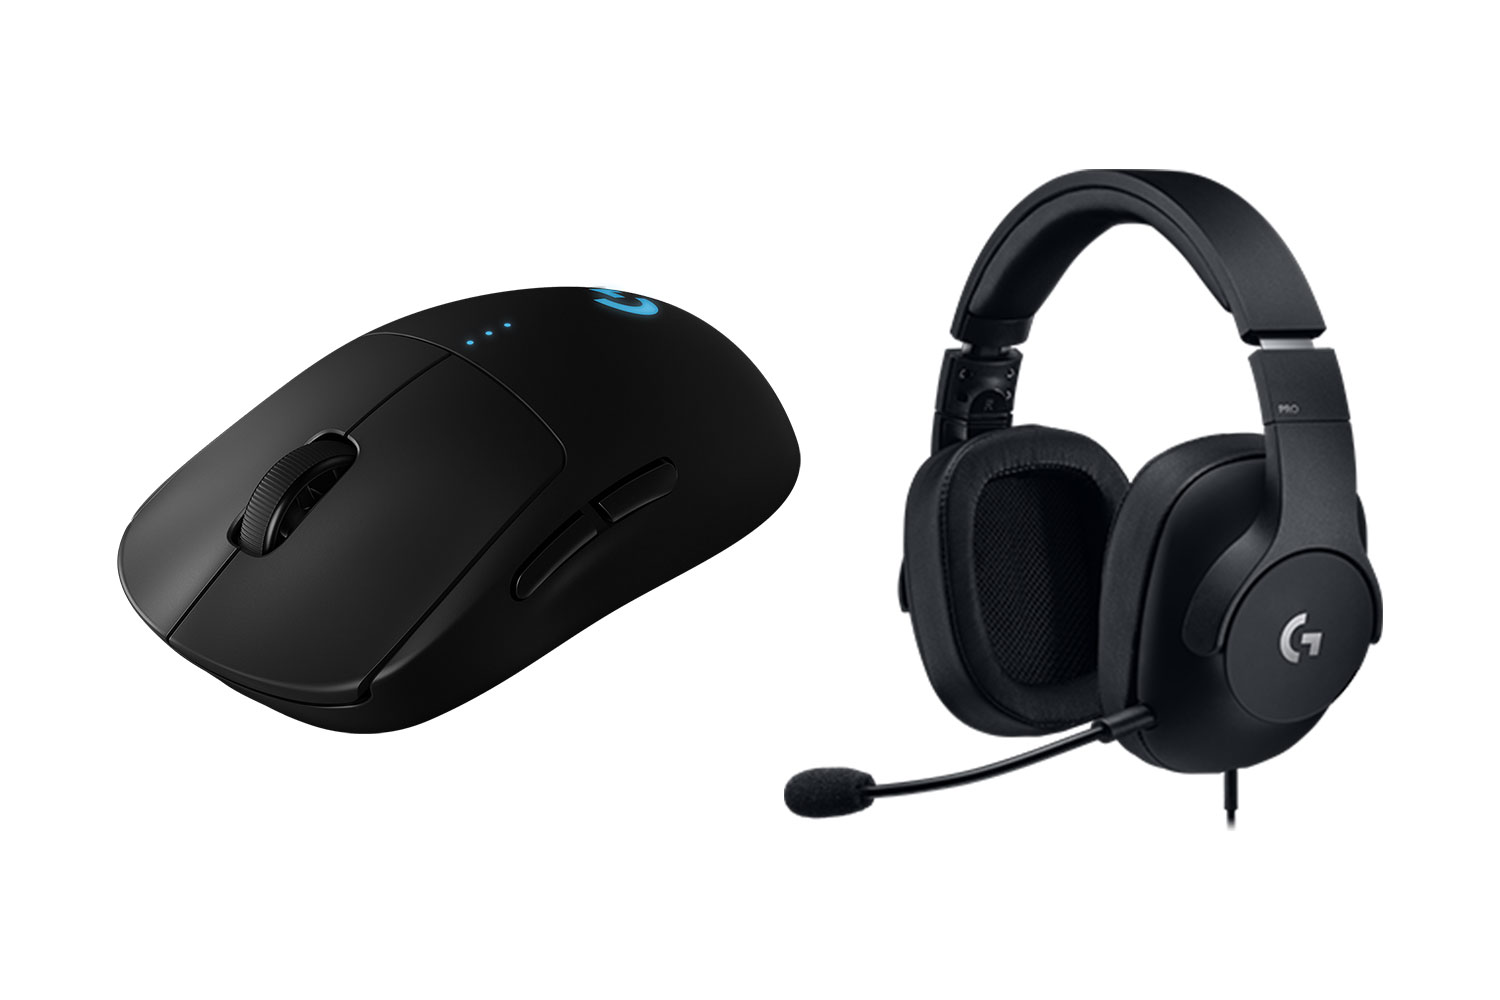 Logitech G PRO Wireless Gaming Mouse and Gaming Headset Now Available in Malaysia